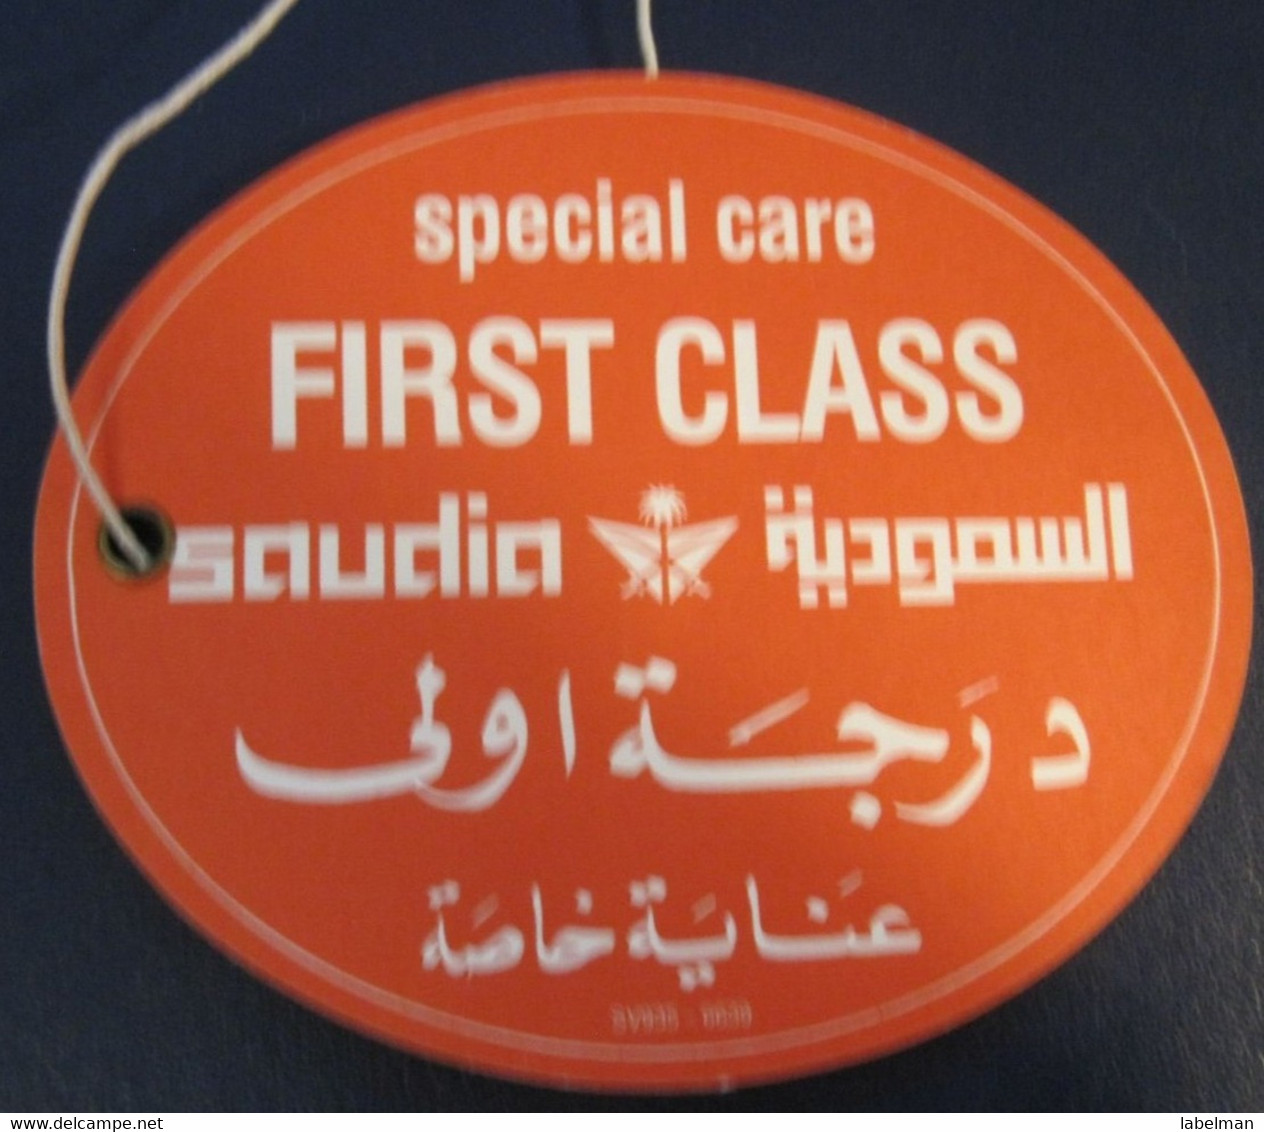 SAUDI ARABIAN SAUDIA RIYADH AIRLINE TAG STICKER LABEL TICKET LUGGAGE BUGGAGE PLANE AIRCRAFT AIRPORT - Étiquettes à Bagages